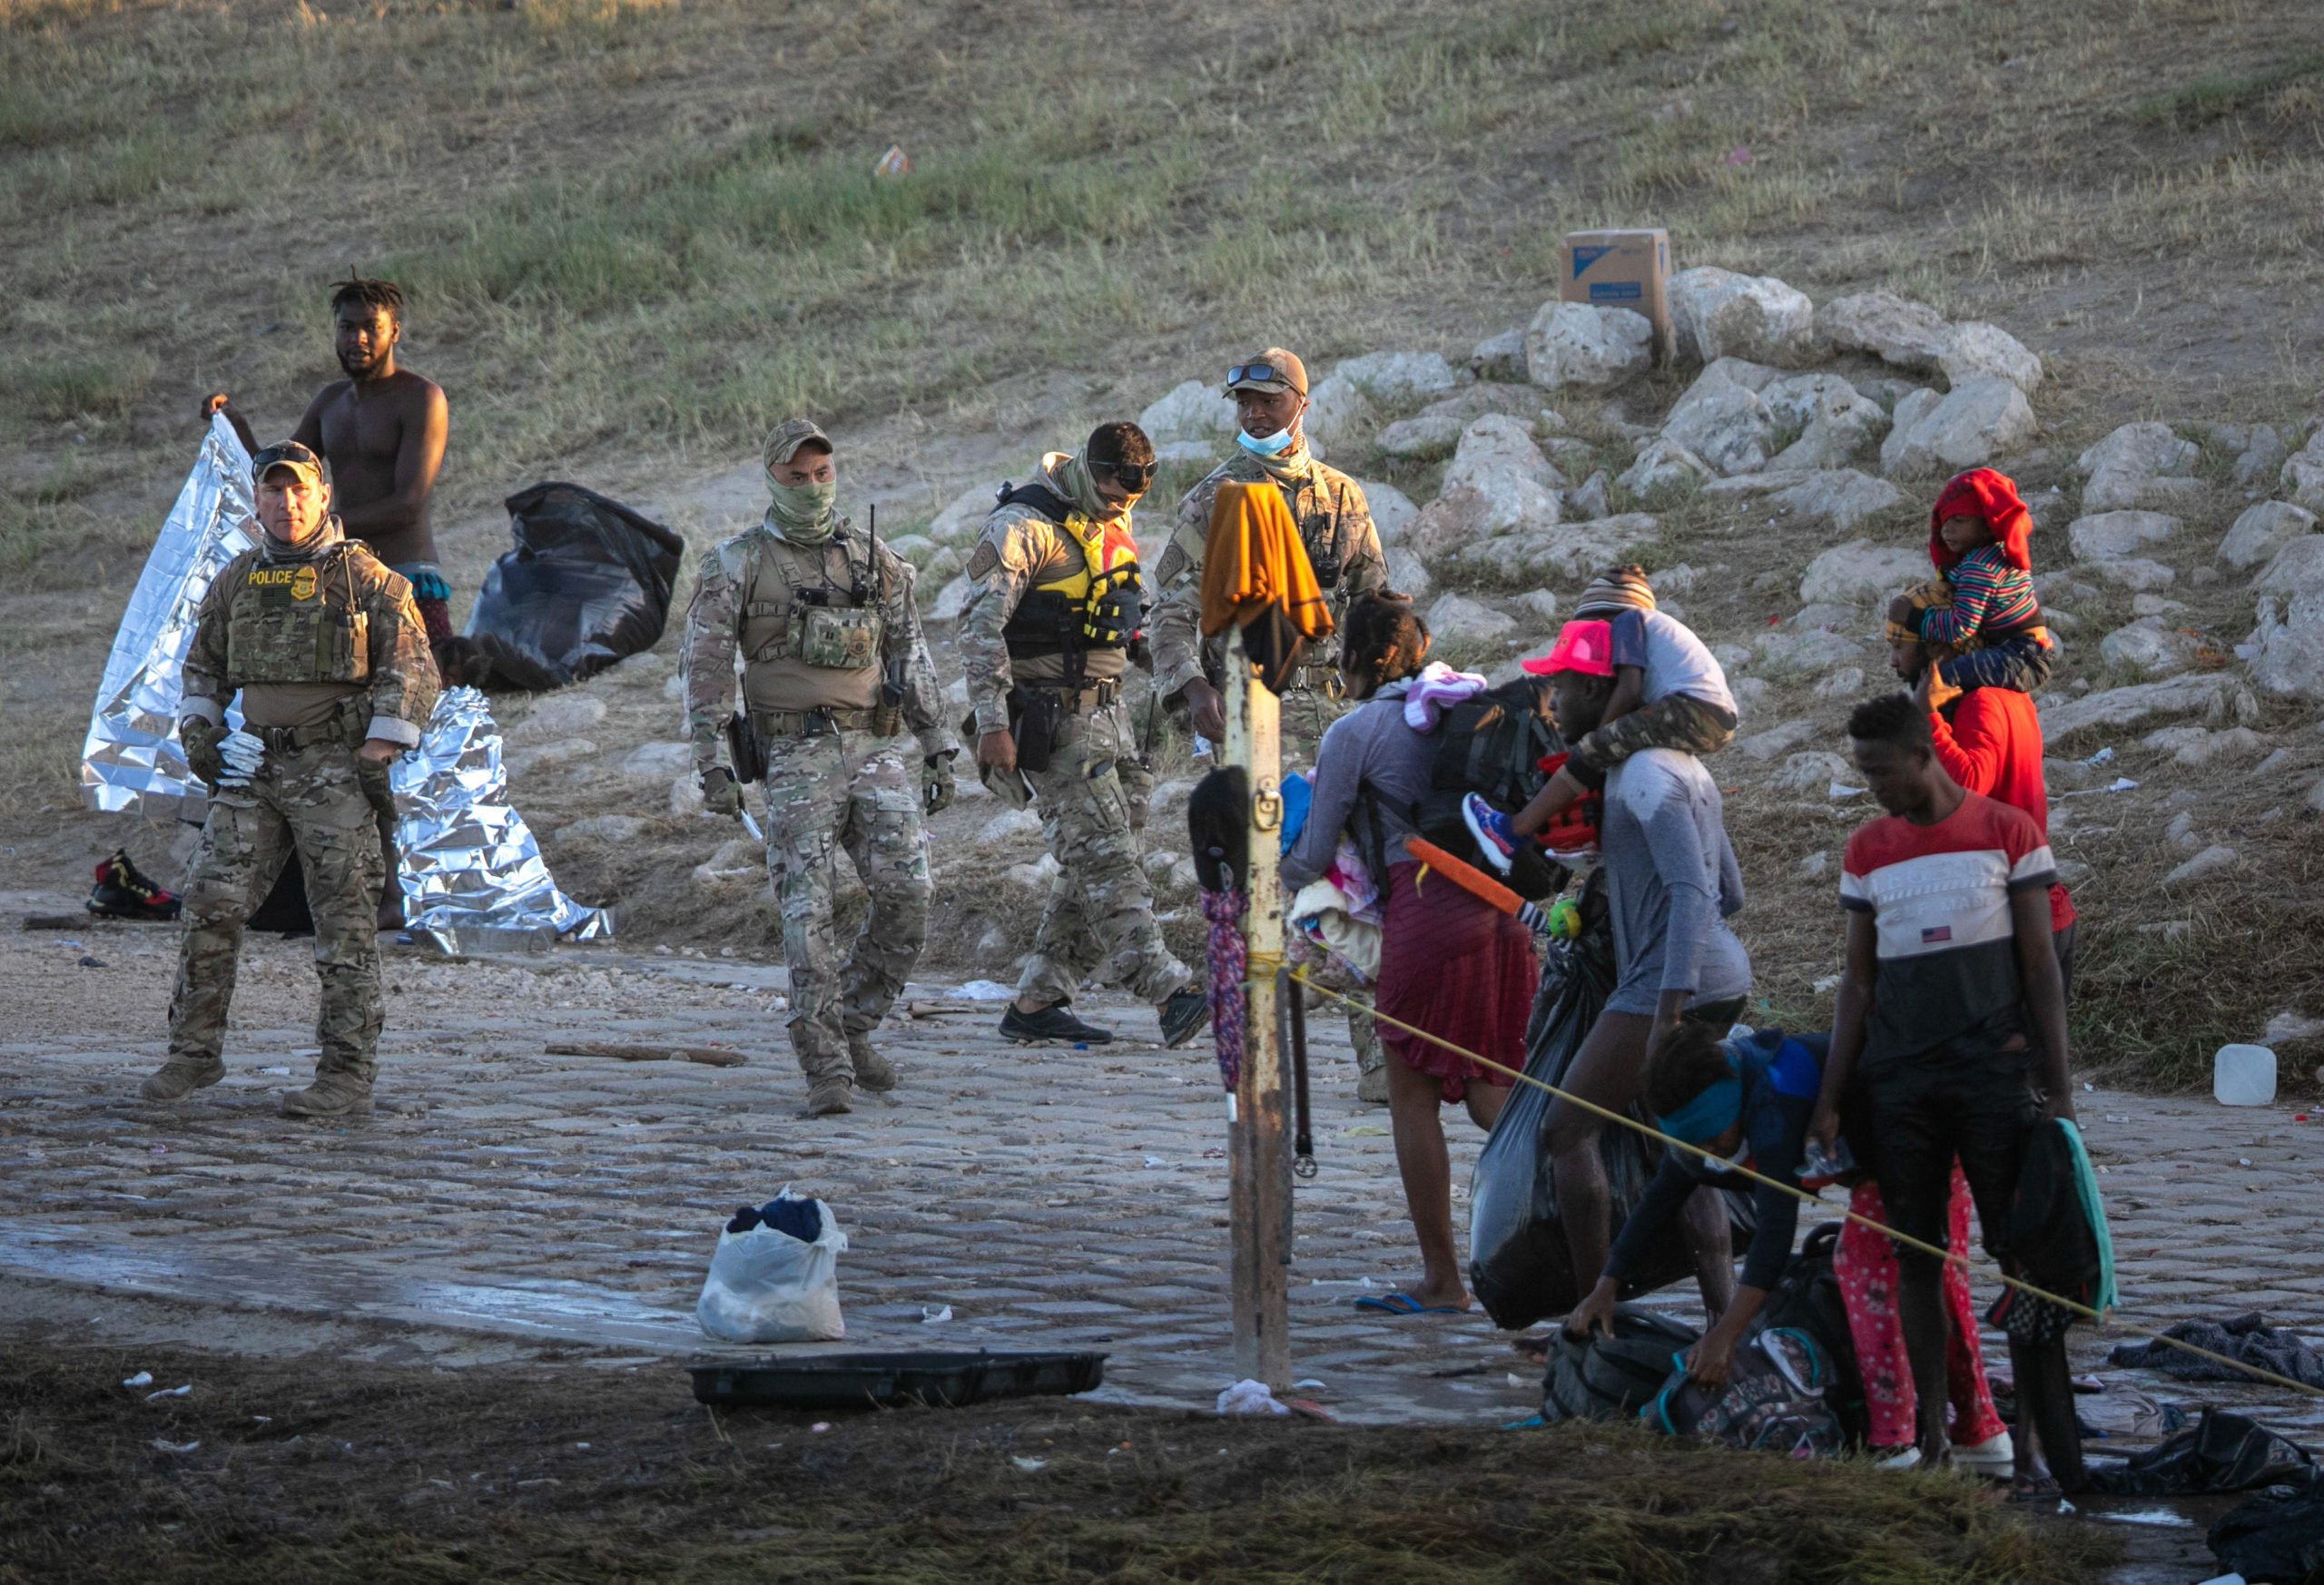 U.S. Border Patrol agents look on after Haitian immigrant families crossed the Rio Grande to Del Rio, Texas on September 23, 2021, from Ciudad Acuna, Mexico. (Photo by John Moore/Getty Images)